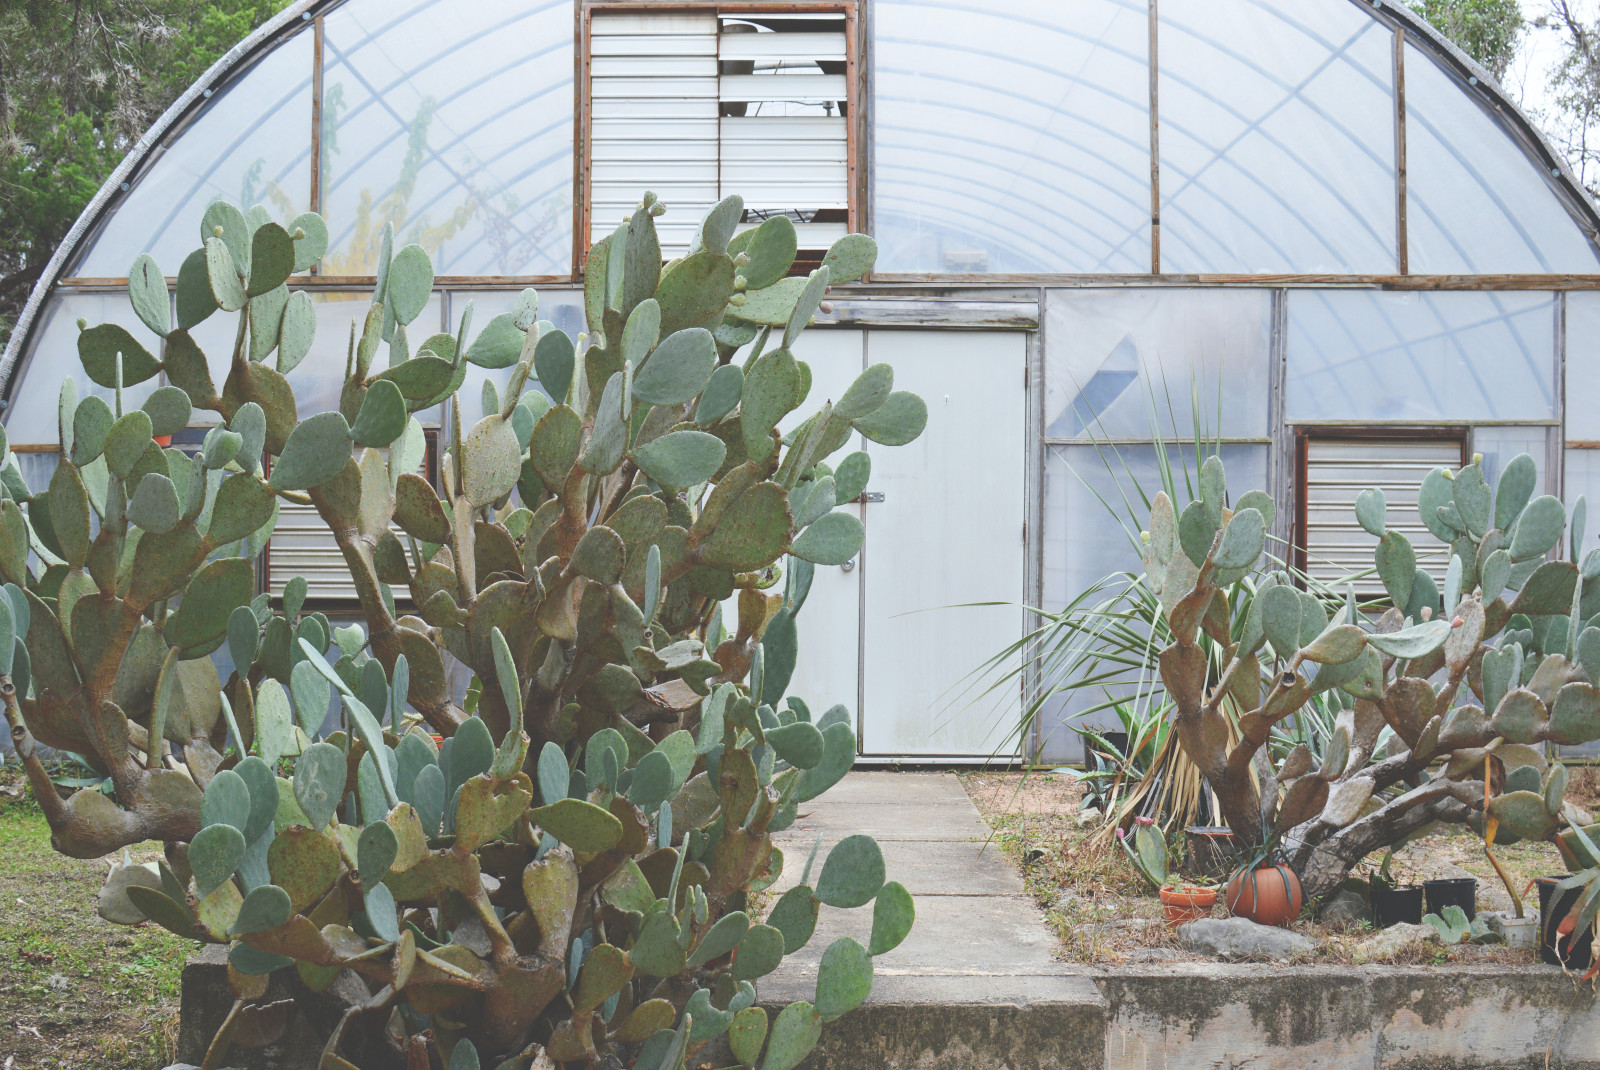 Cactus plants with greenhouse in background